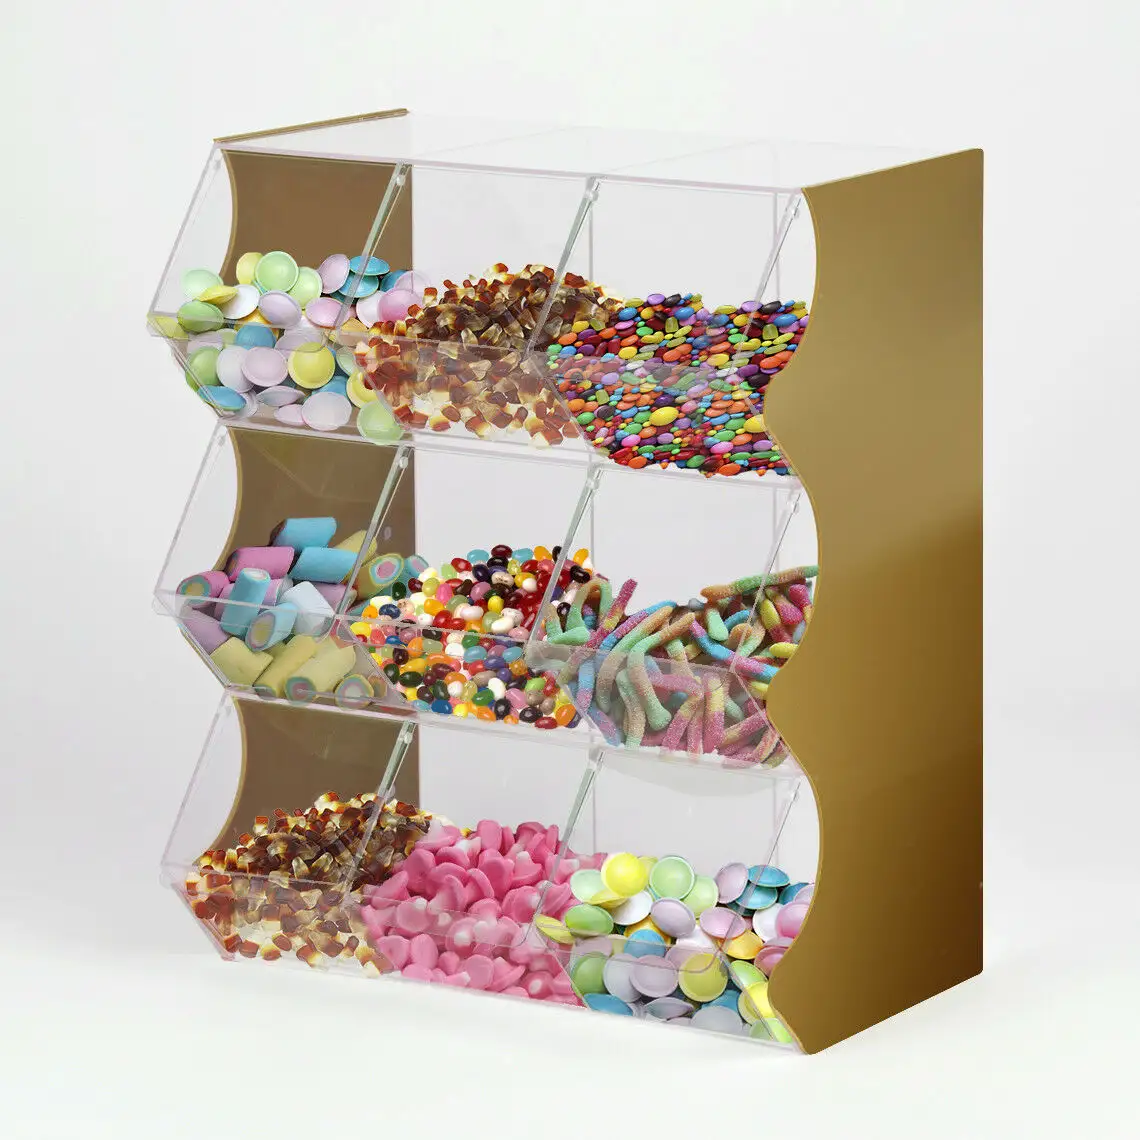 Stapel Pick and Mix Spender | Sweet Display | Hochzeit Sweet Stand